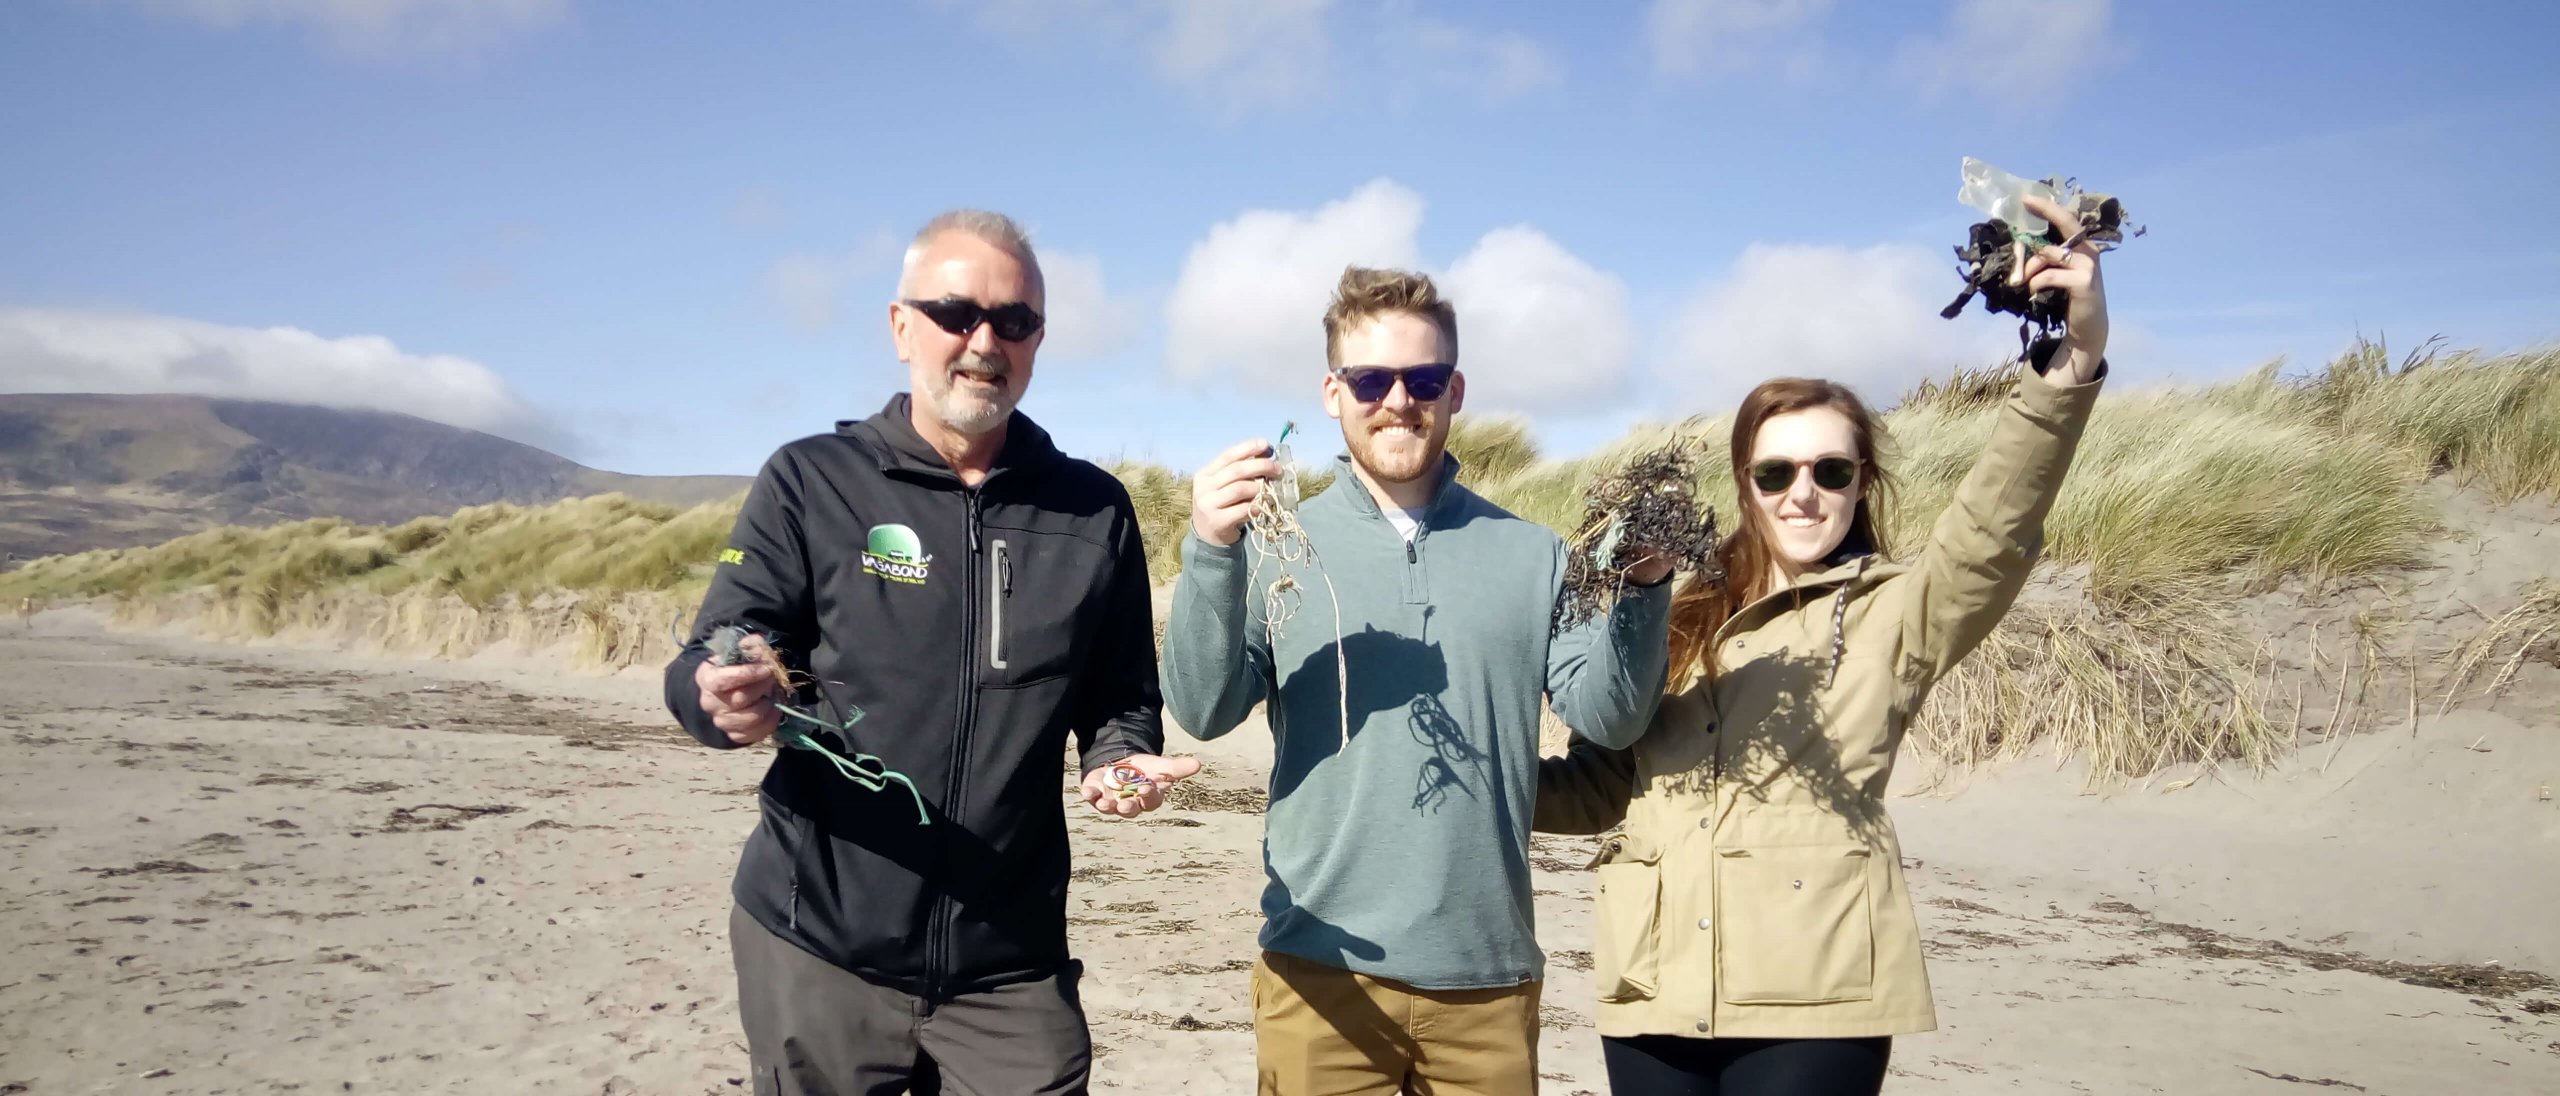 Our guests picking up plastic on Ventry beach in Dingle 